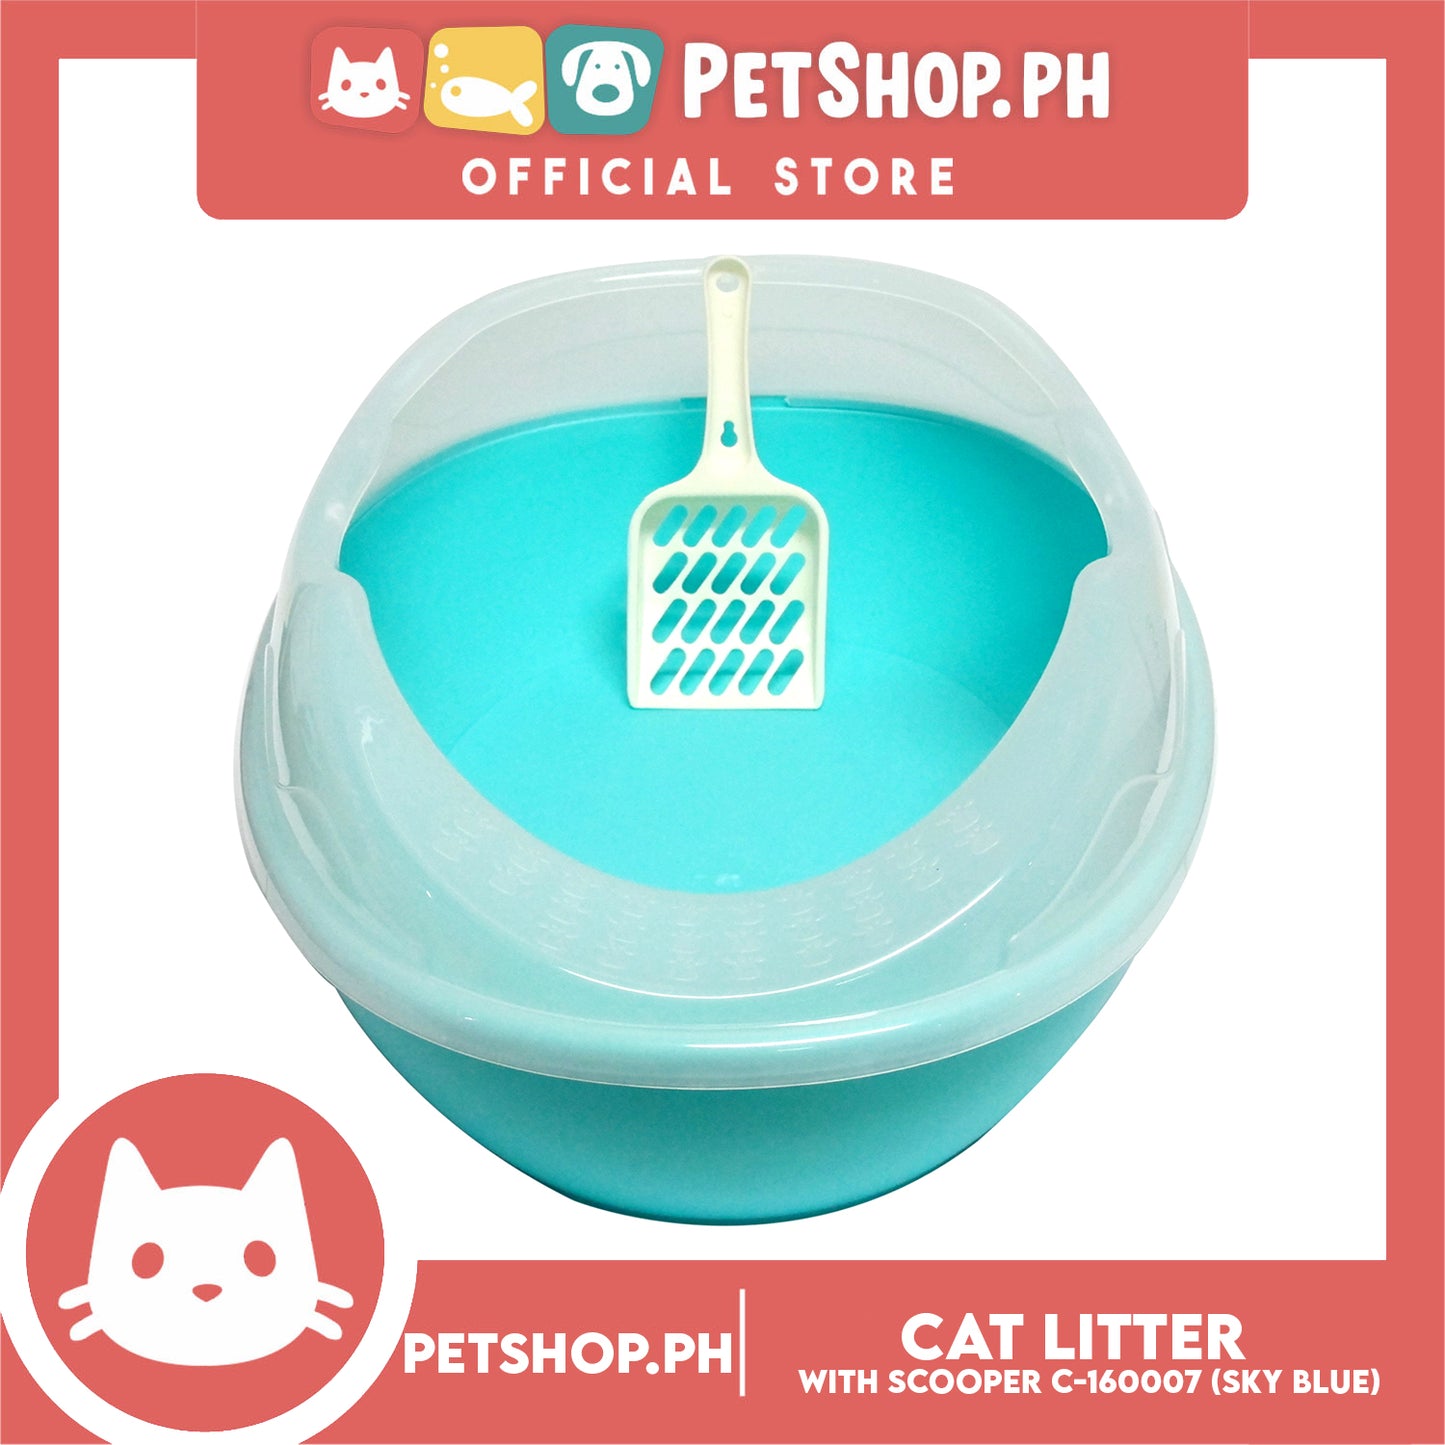 Cat Litter Box with Scooper Large C-160007